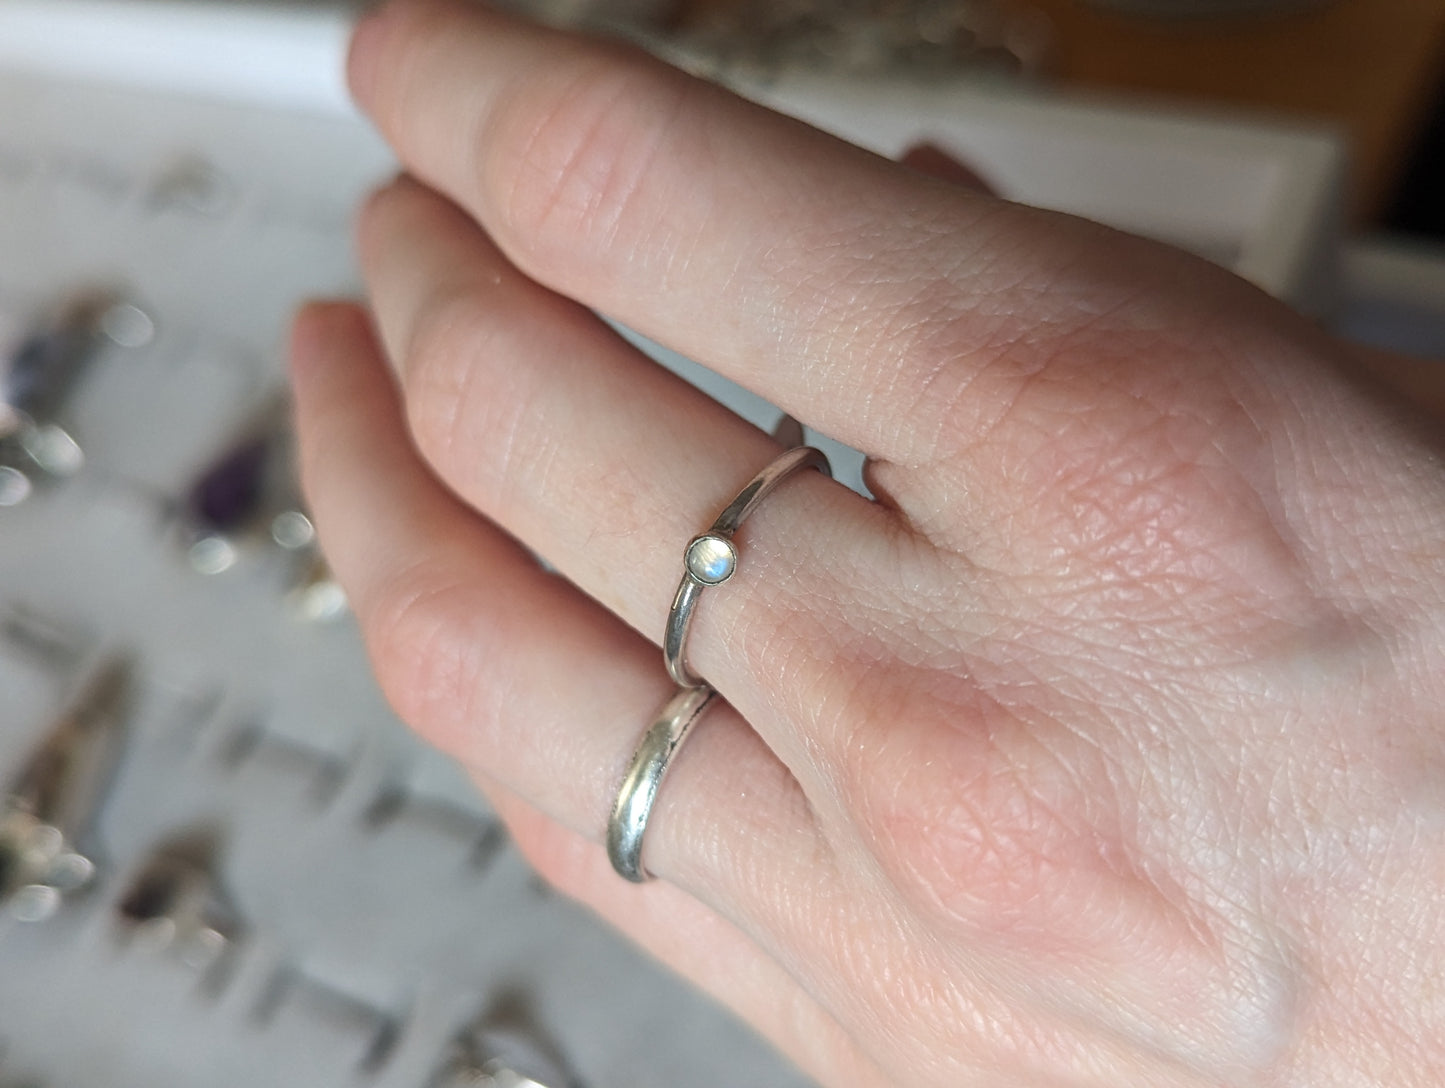 3mm Moonstone Sterling Silver Ring - Size 6